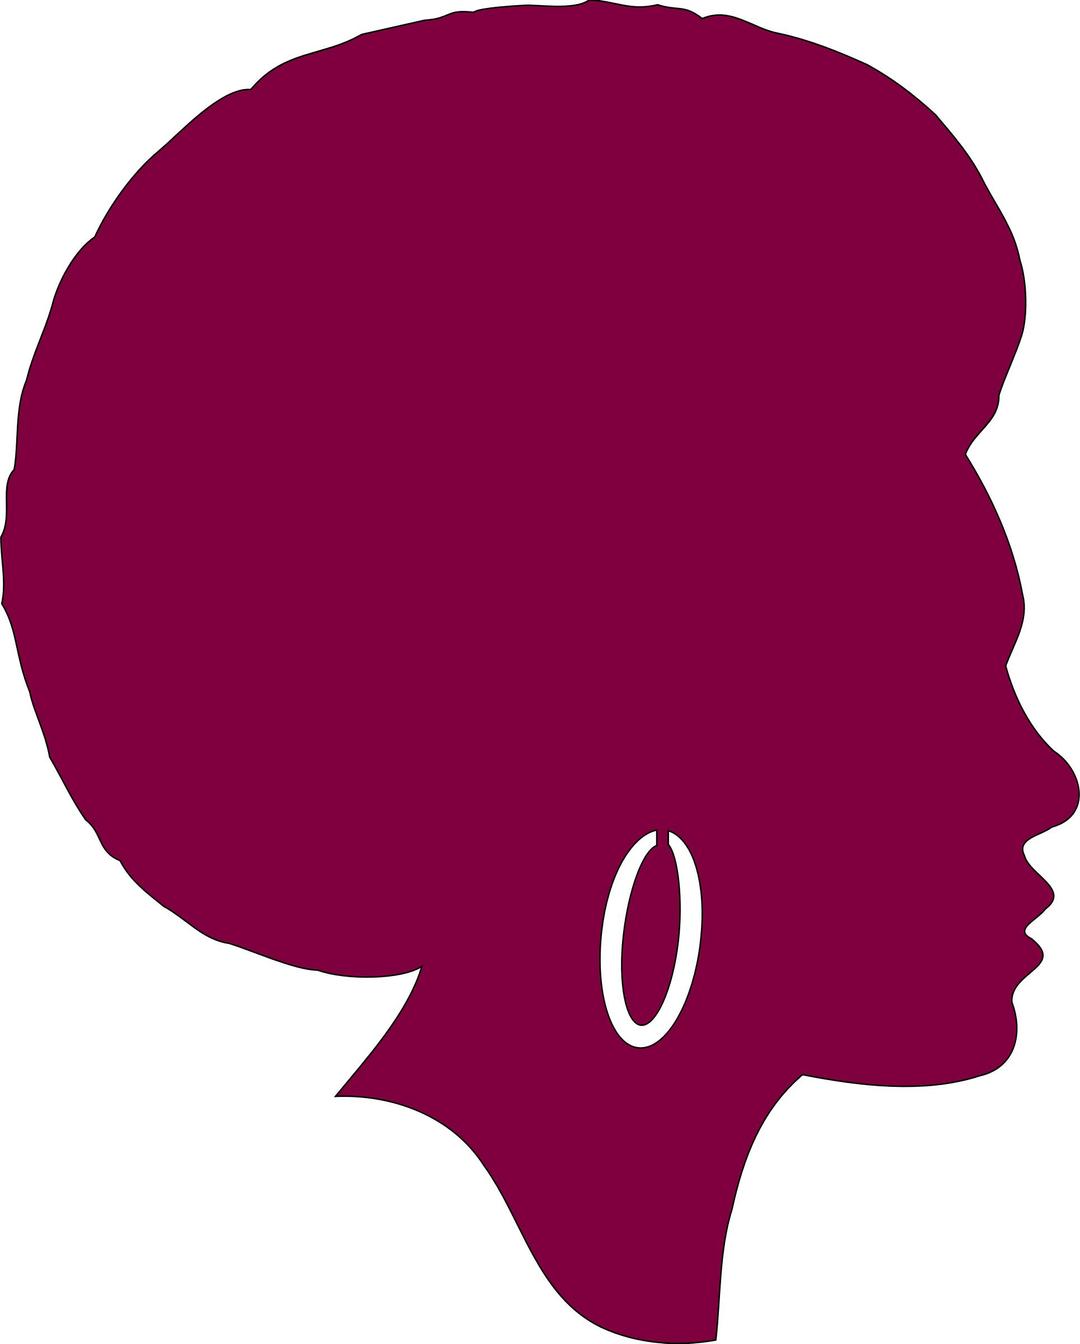 African American Female Silhouette - Remix in Purple w/o Pick png transparent